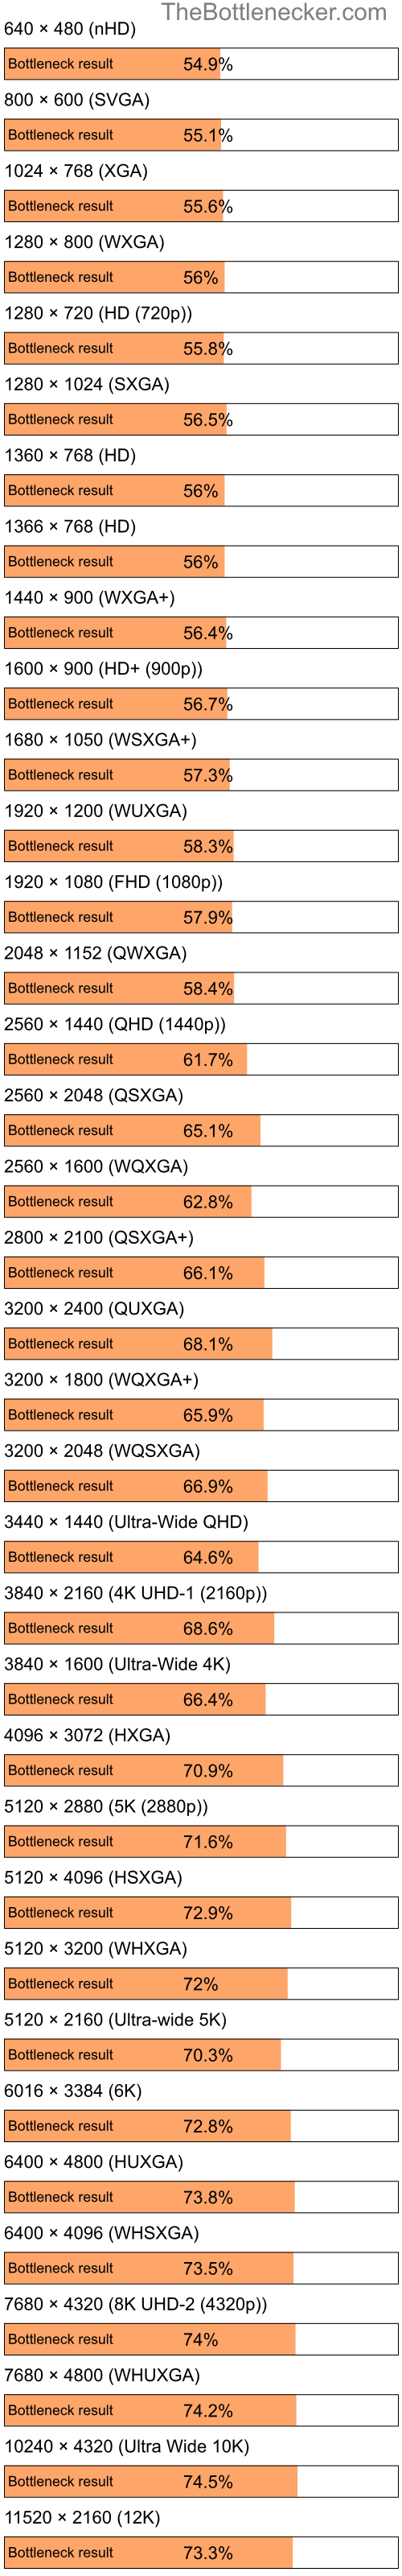 Bottleneck results by resolution for Intel Pentium 4 and AMD Radeon X1650 Pro in Processor Intense Tasks